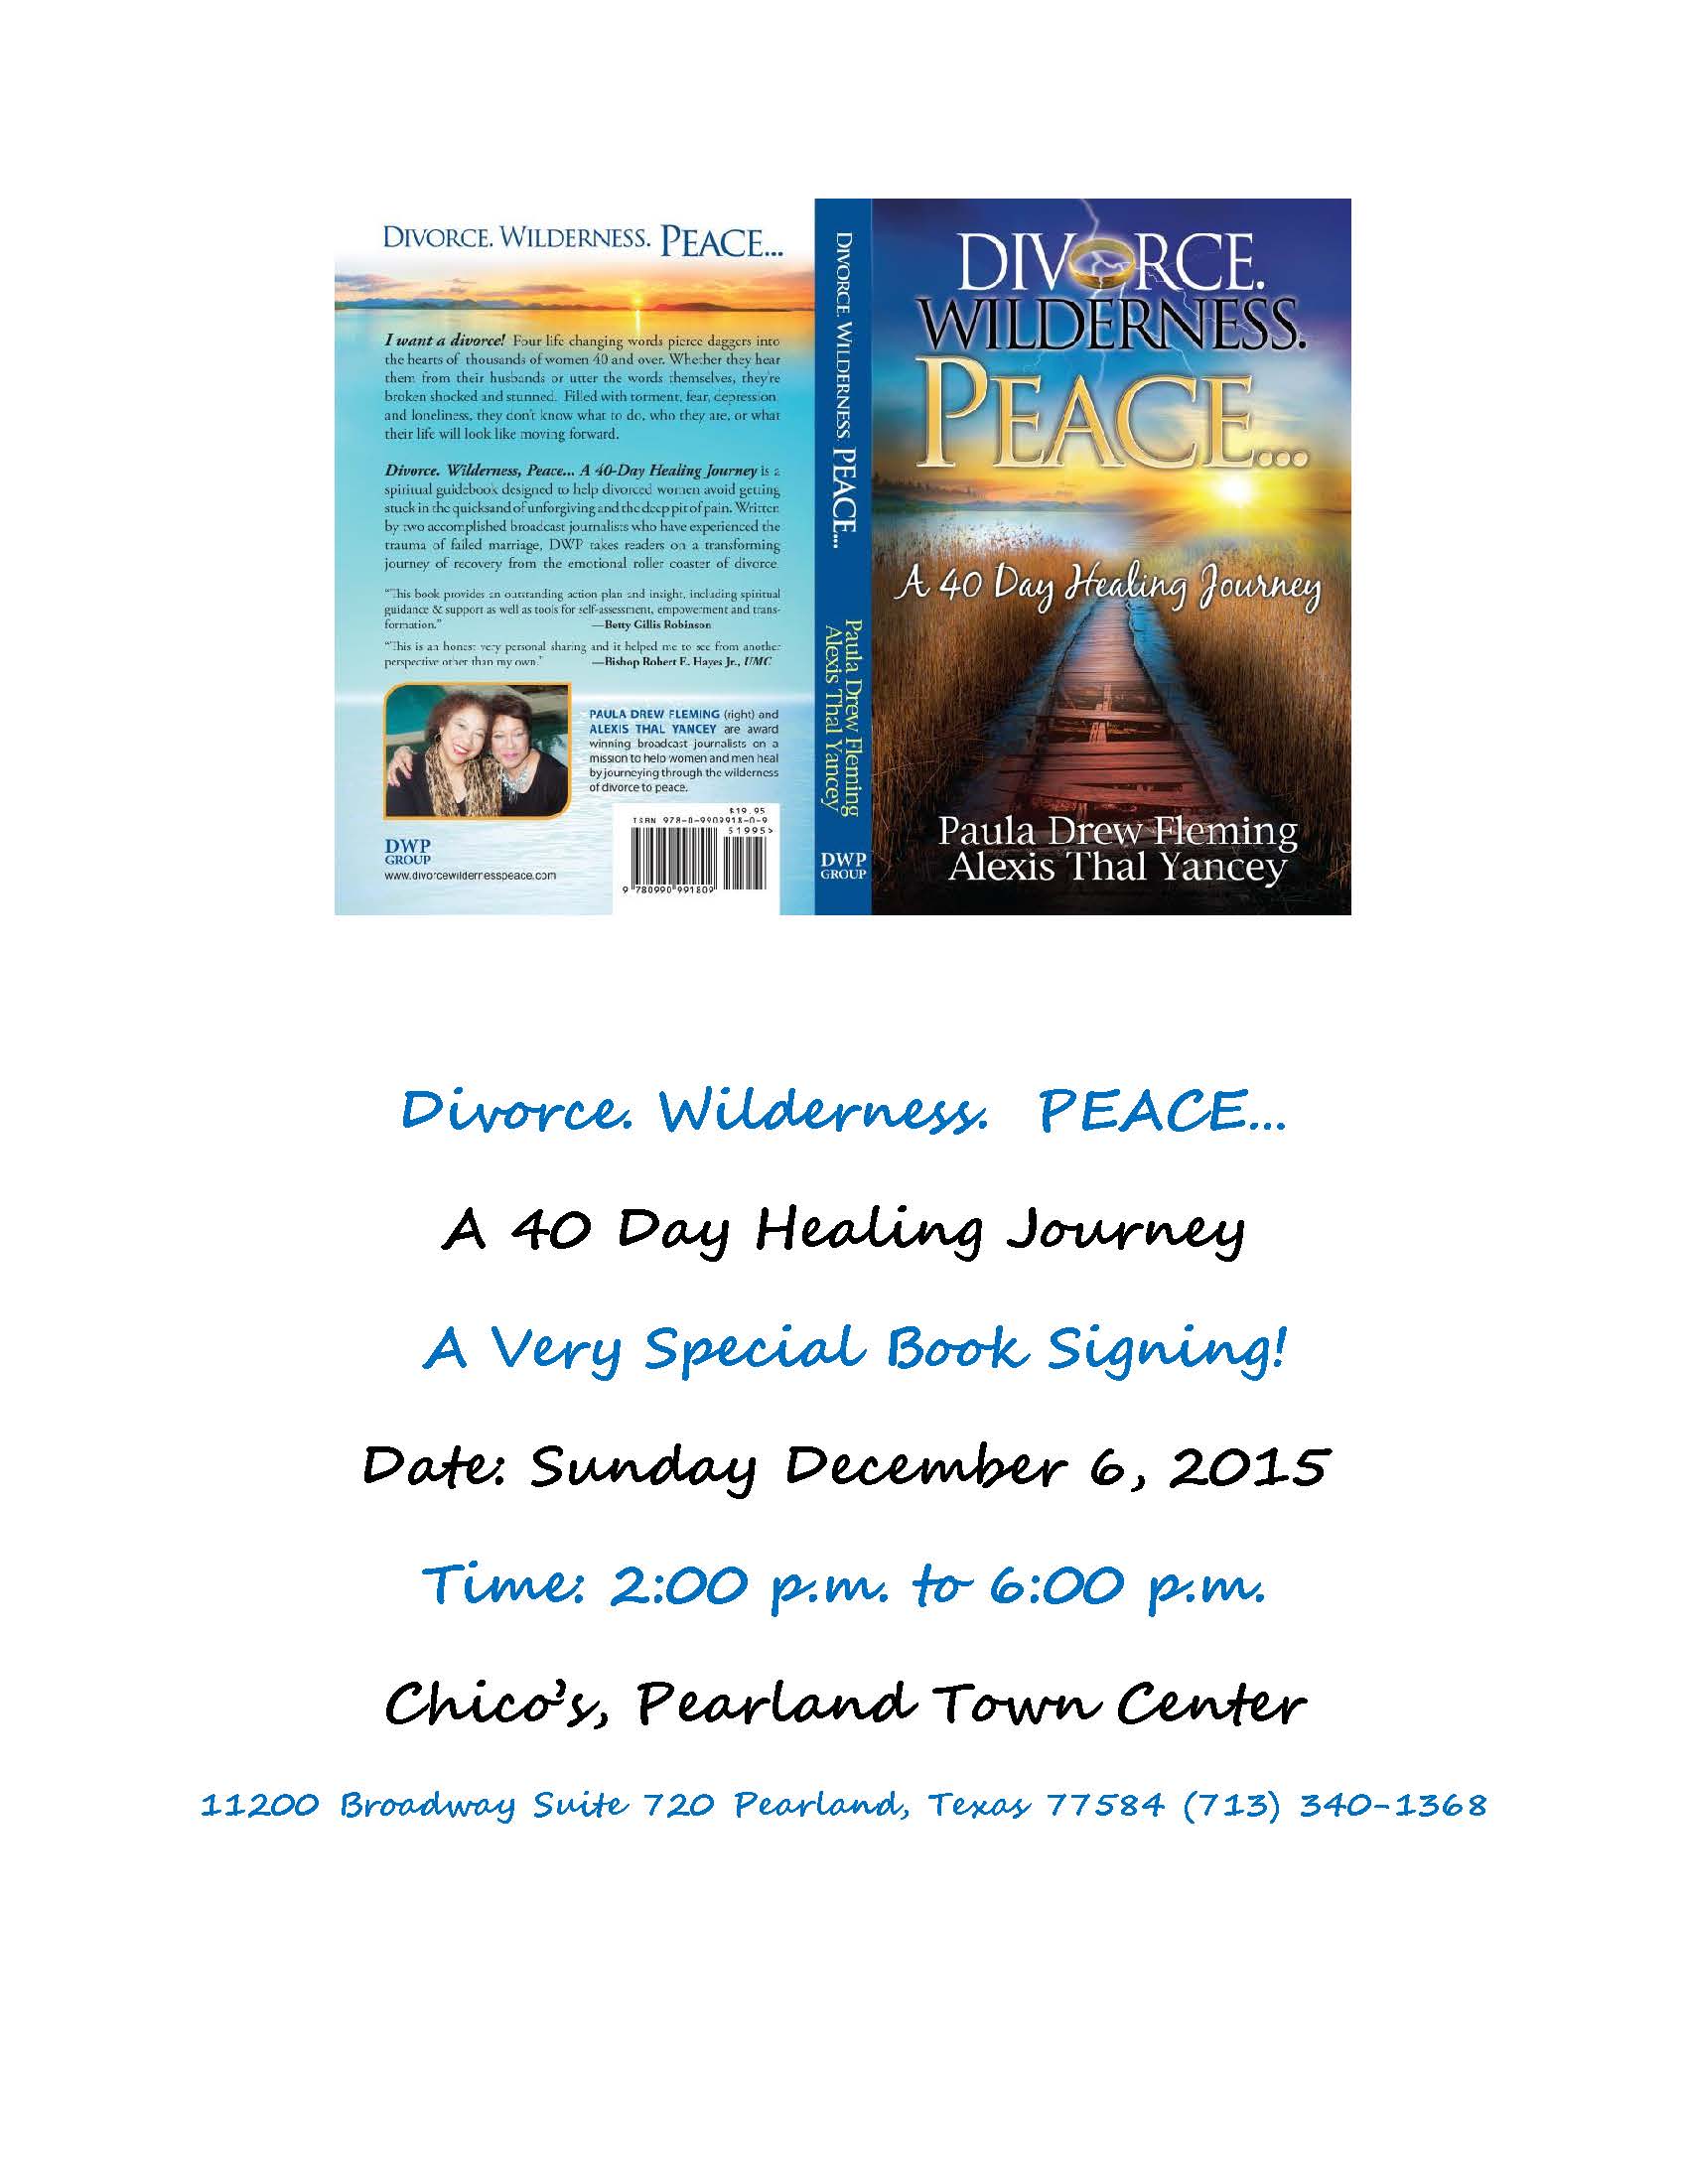 Chico's &amp; DWP Book Signing flyer -112415